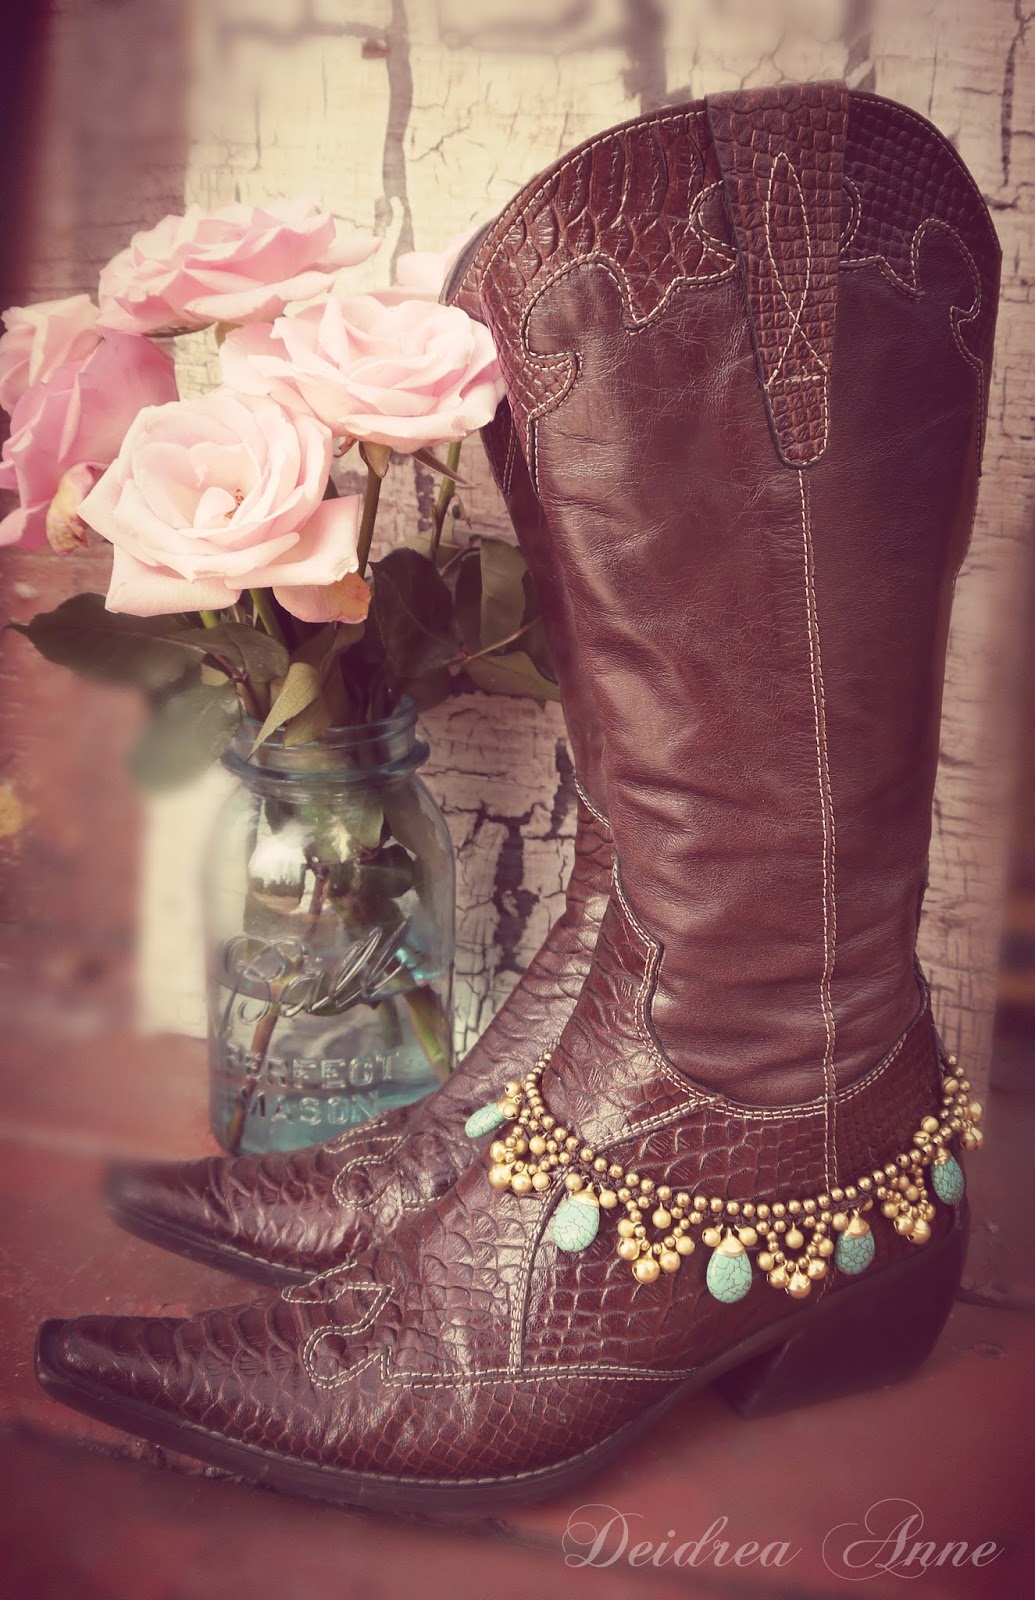 Suzy Homefaker: Glam Cowgirl Boots